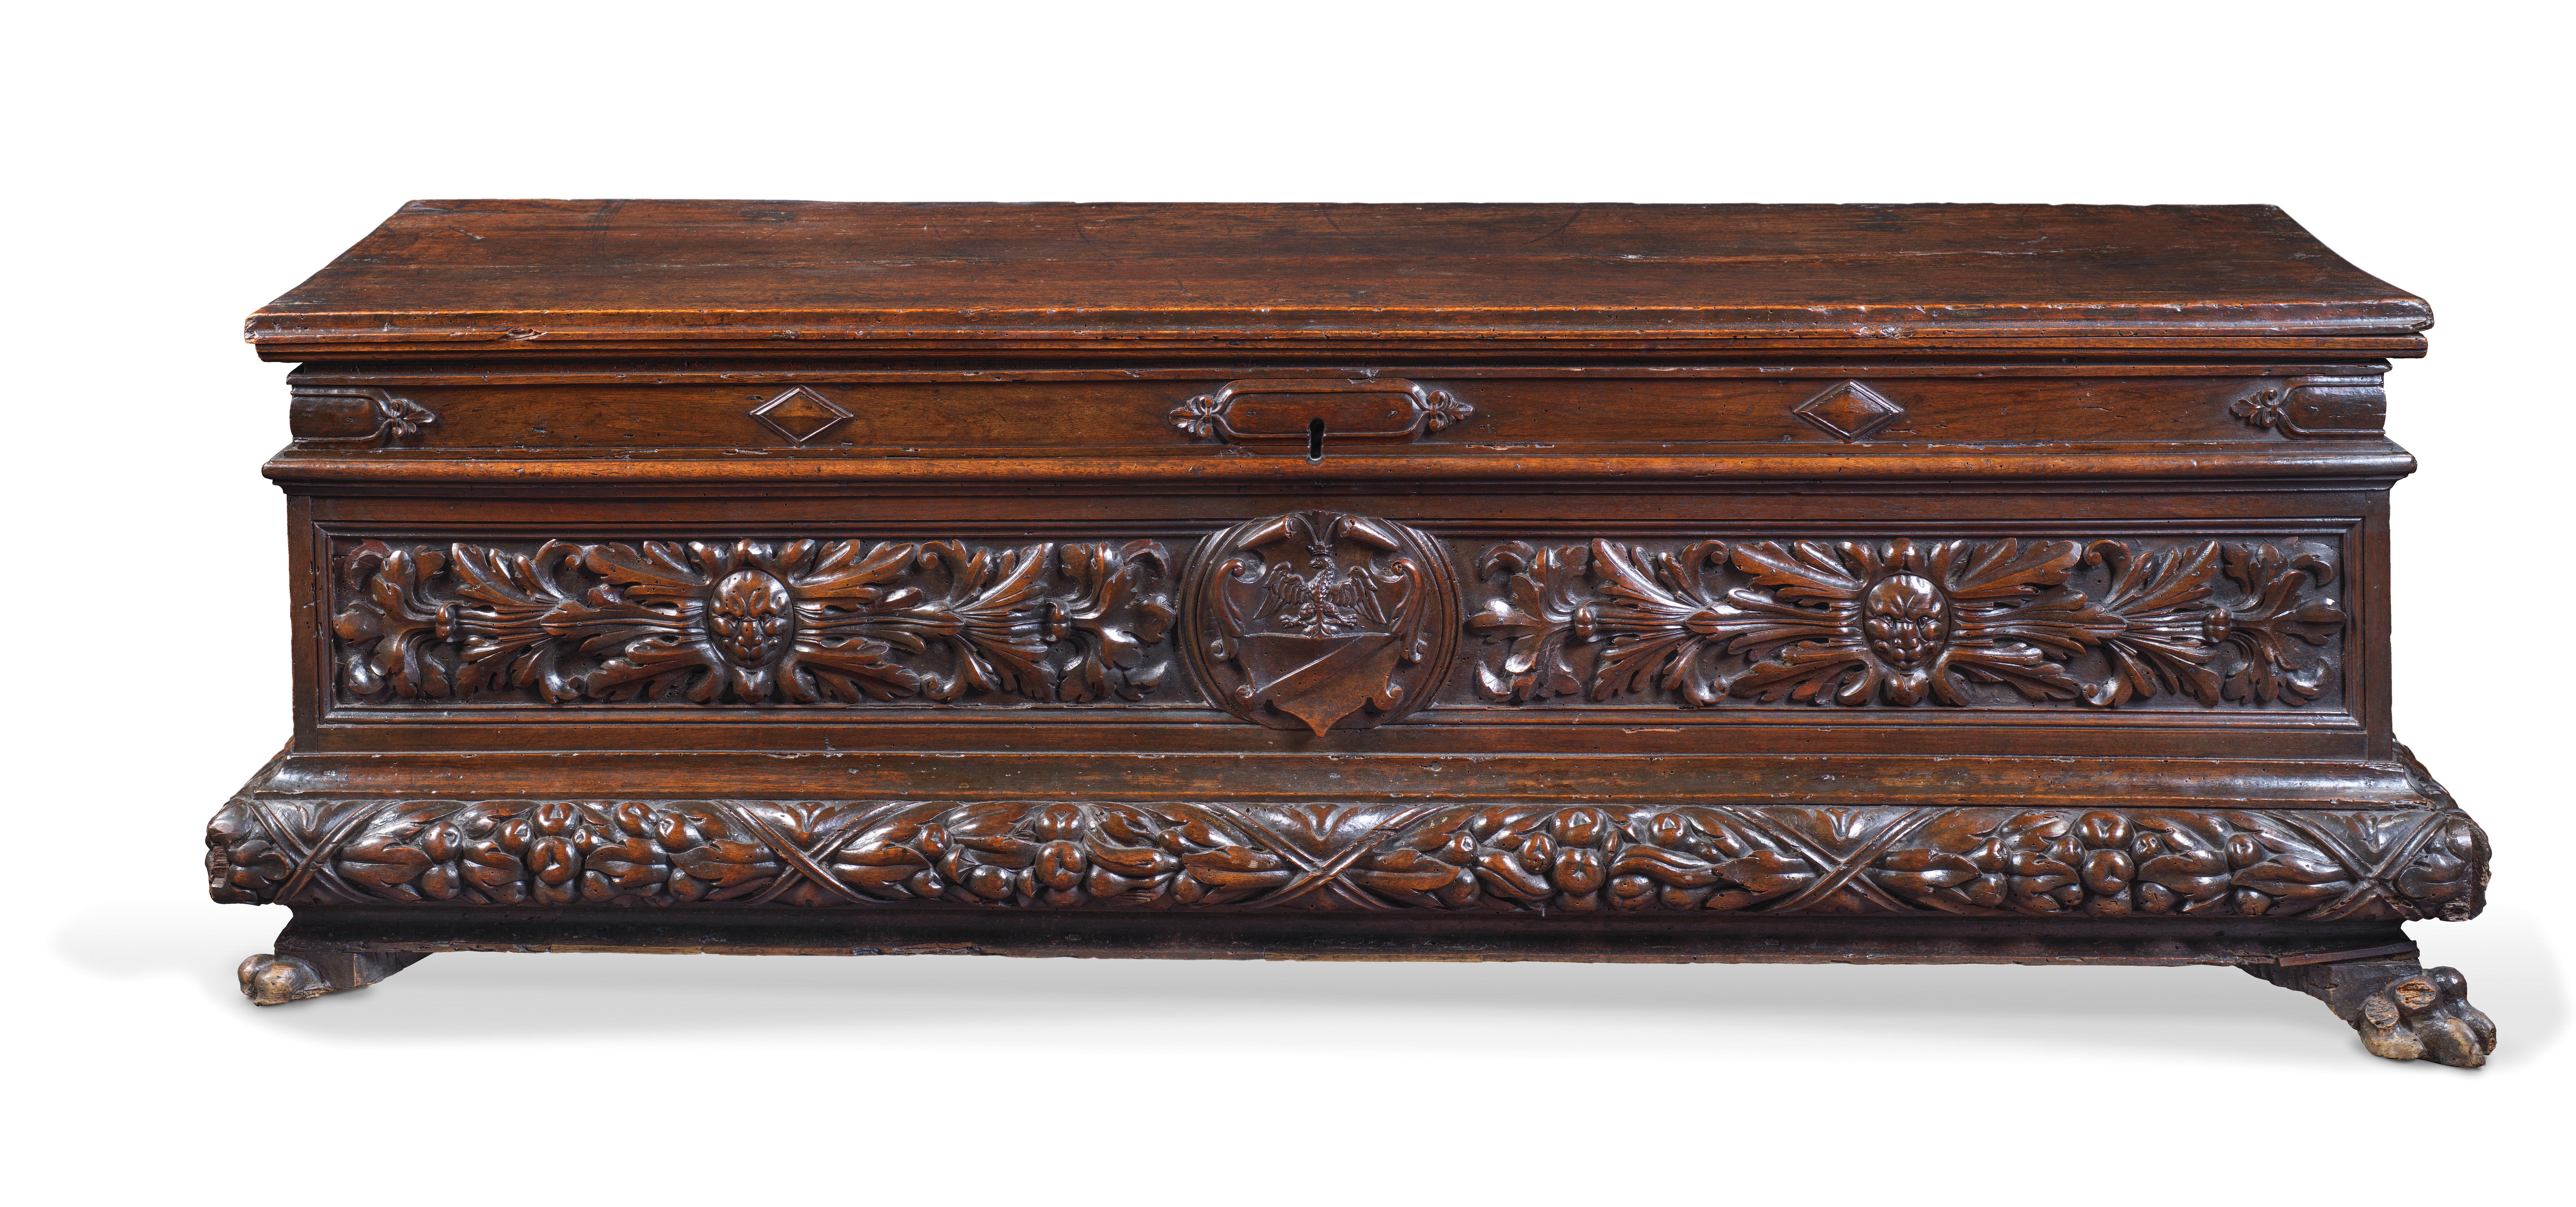 This Italian walnut chest called « cassone » is shaped as an antic sarcophagus. The beautiful patina and the plain lid bring to the fore the facade richly ornated with vegetal motifs and masks. The lateral sides are more soberly executed while the